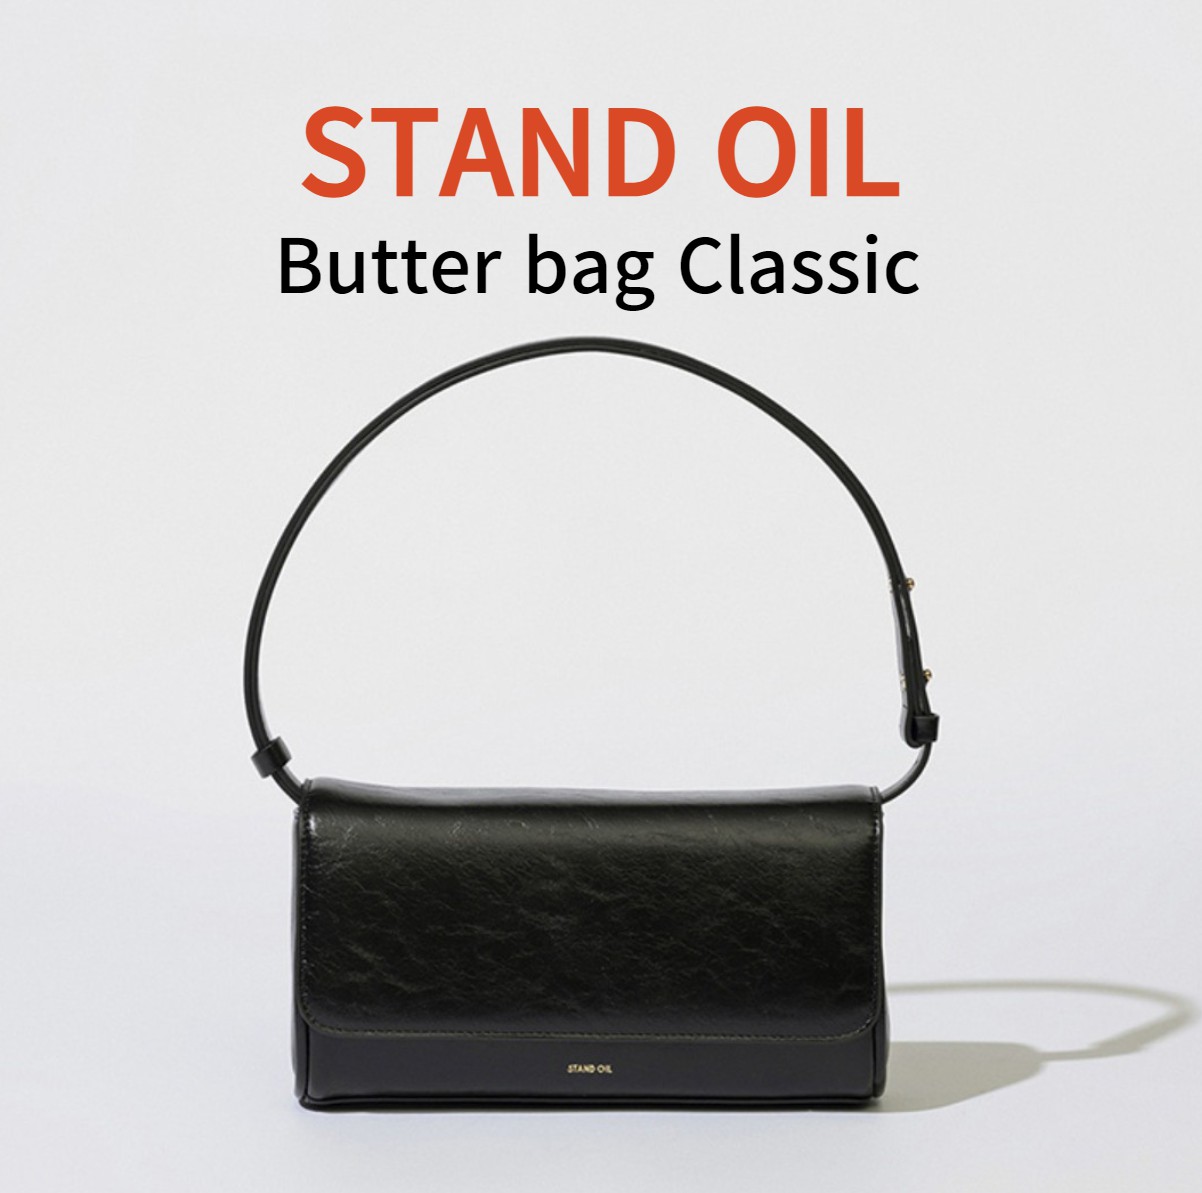 STAND OIL[standoil] バーターバッグ　ミニバッグButter bag Classic